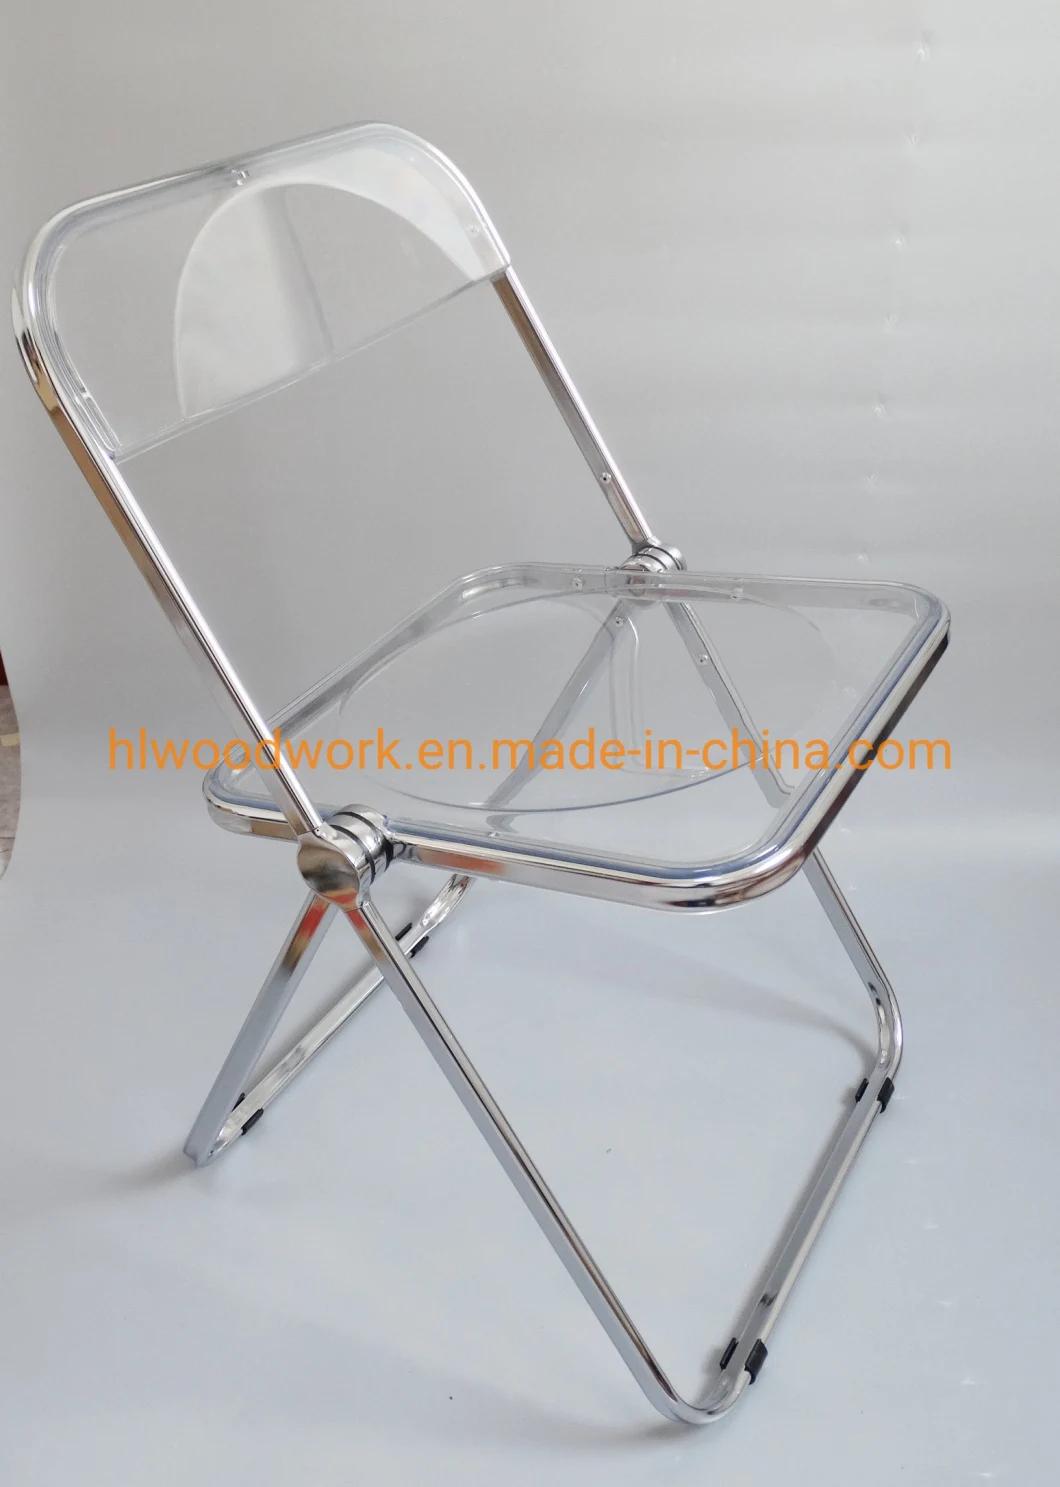 Modern Transparent Grey Folding Chair PC Plastic Outdoor Chair Chrome Frame Office Bar Dining Leisure Banquet Wedding Meeting Chair Plastic Dining Chair